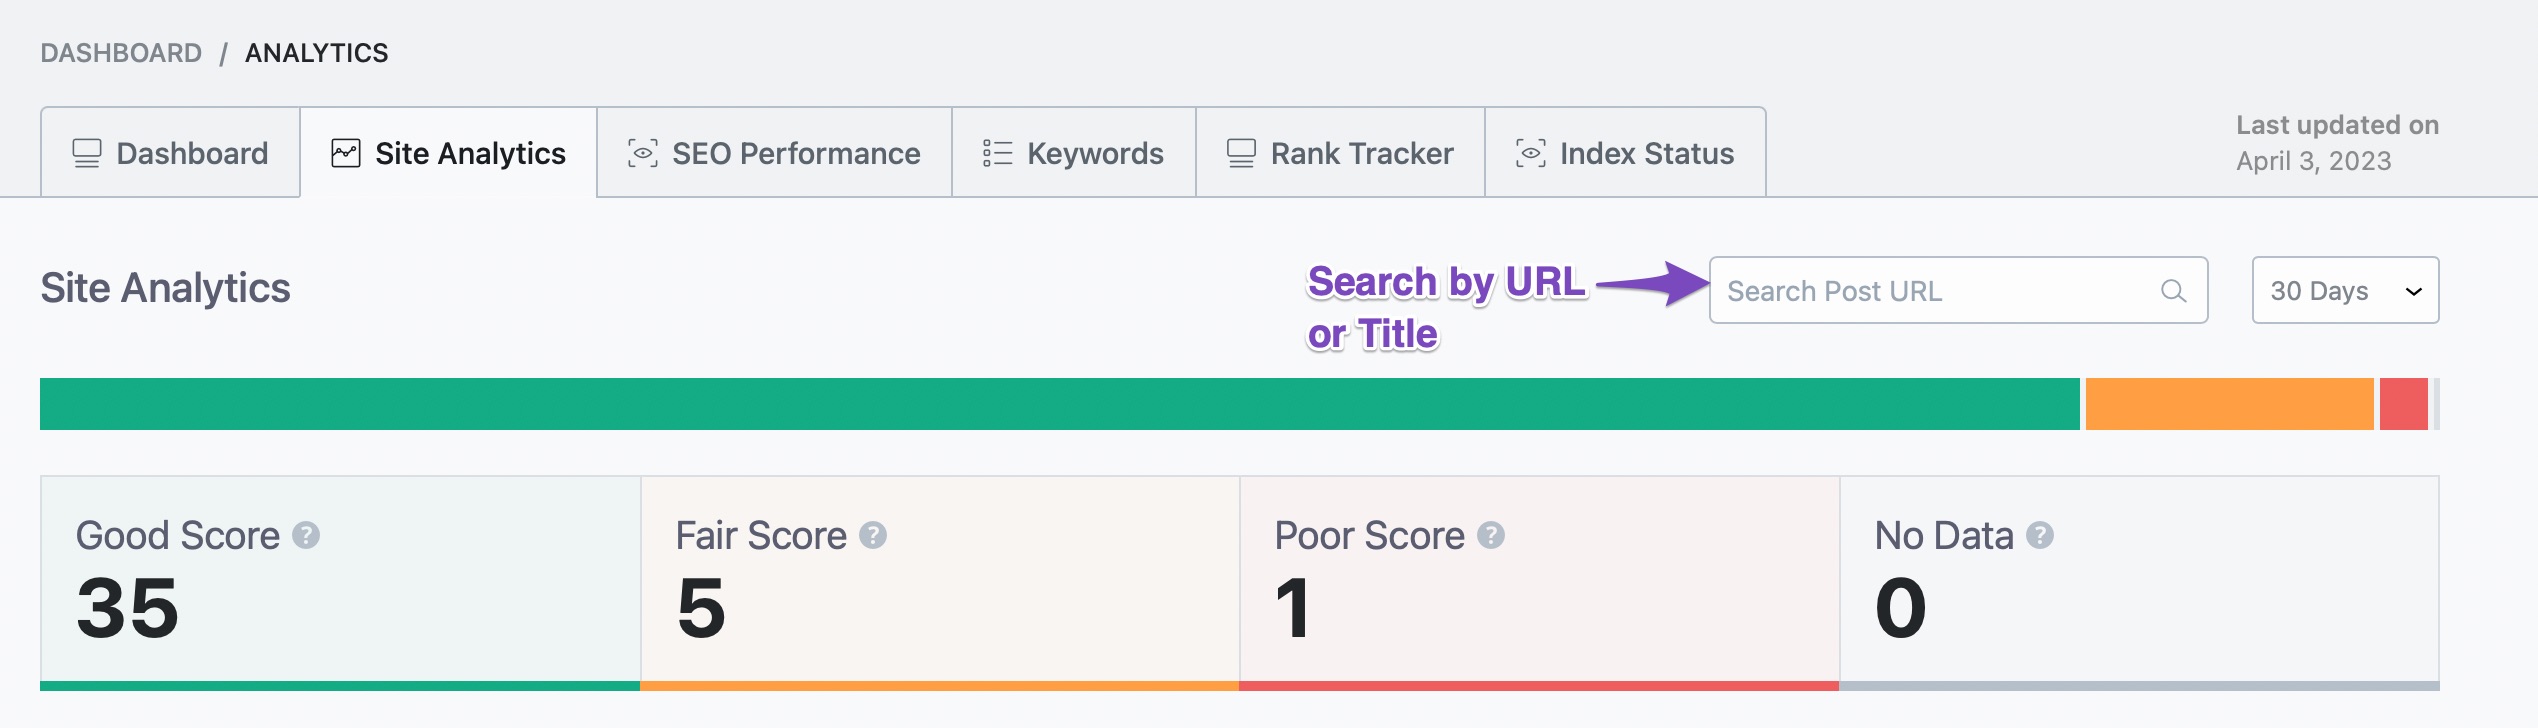 search-by-url-site-analytics